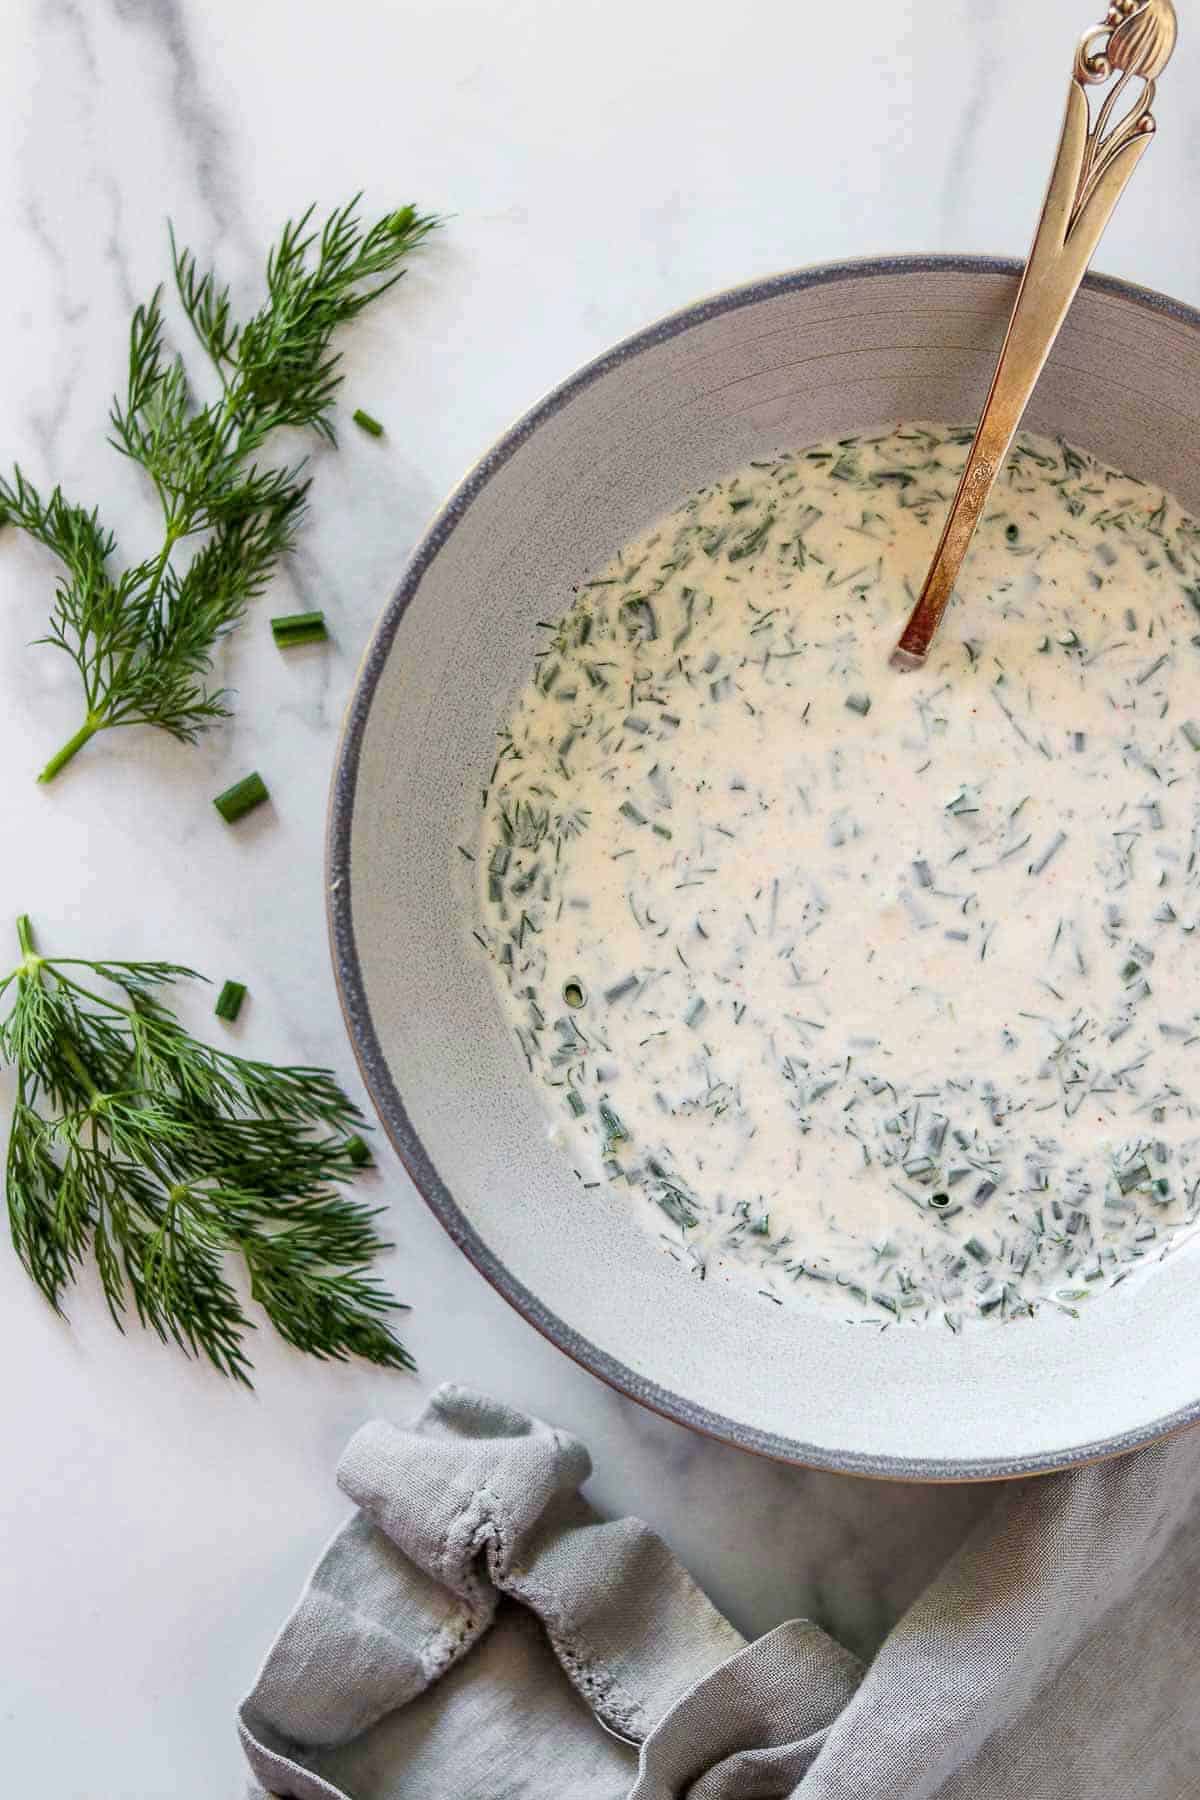 Creamy Herbed Skyr Sauce in a bowl with a spoon next to fresh herbs.